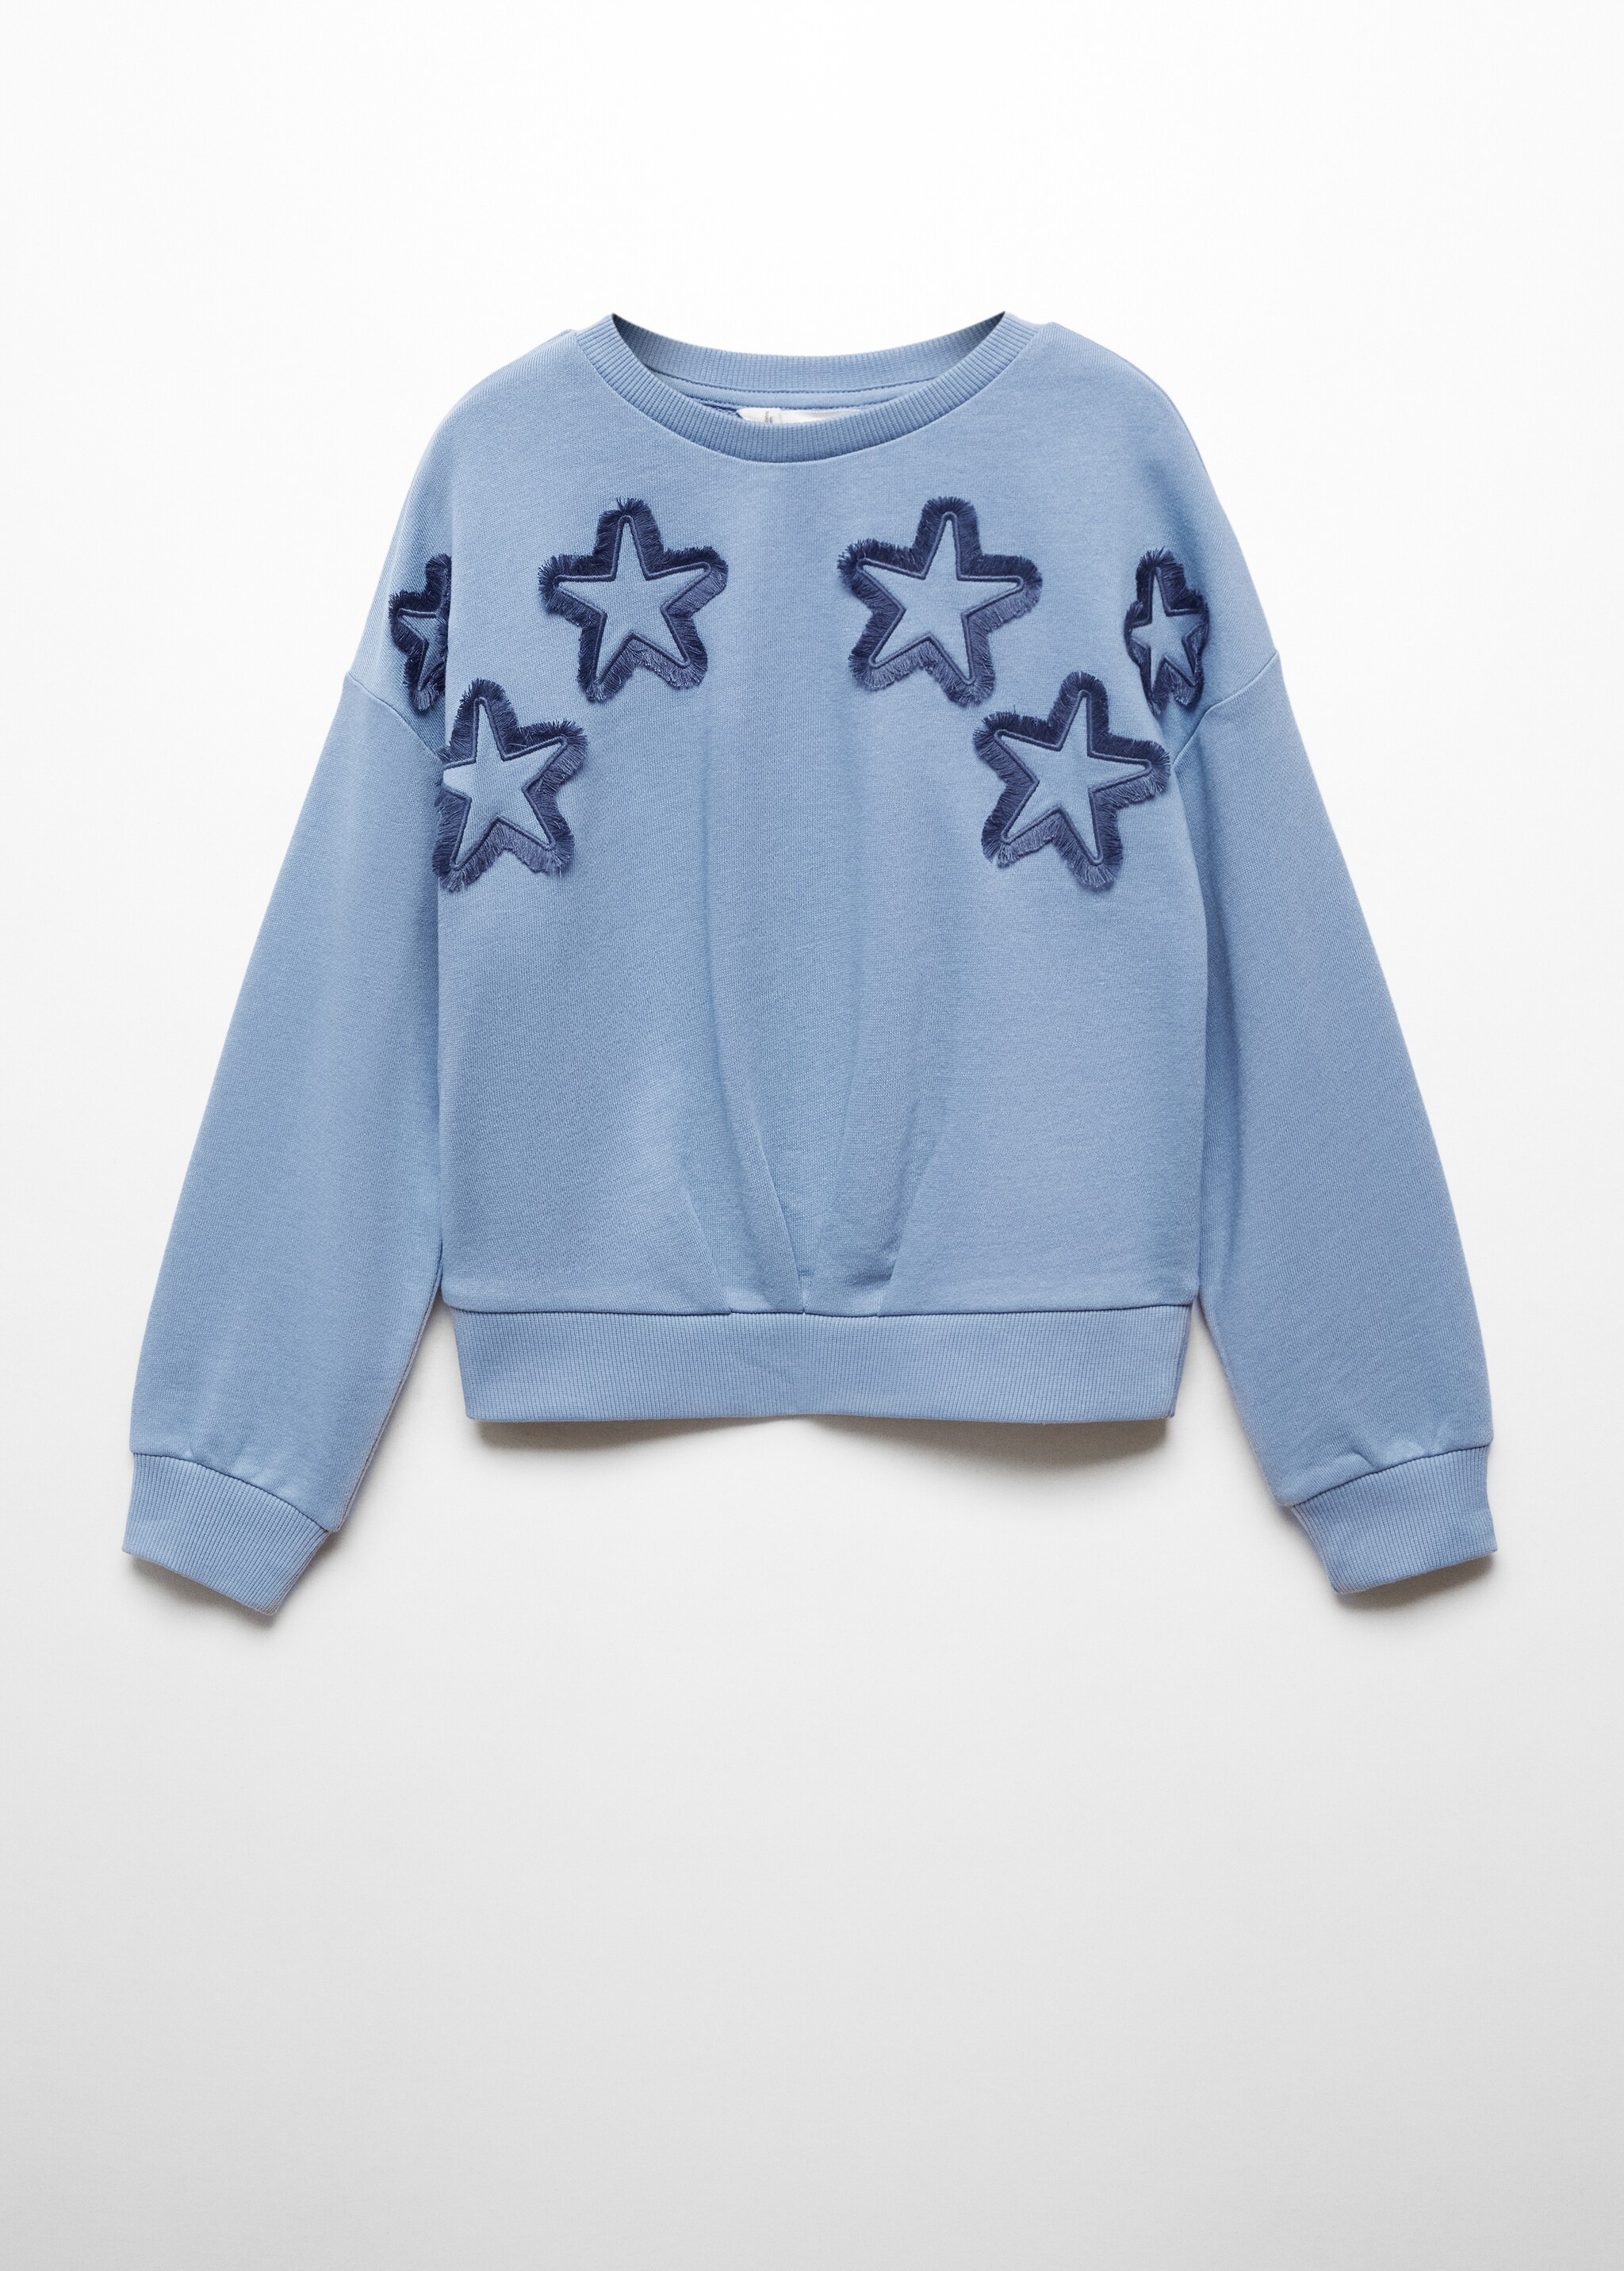 Star sweatshirt - Article without model